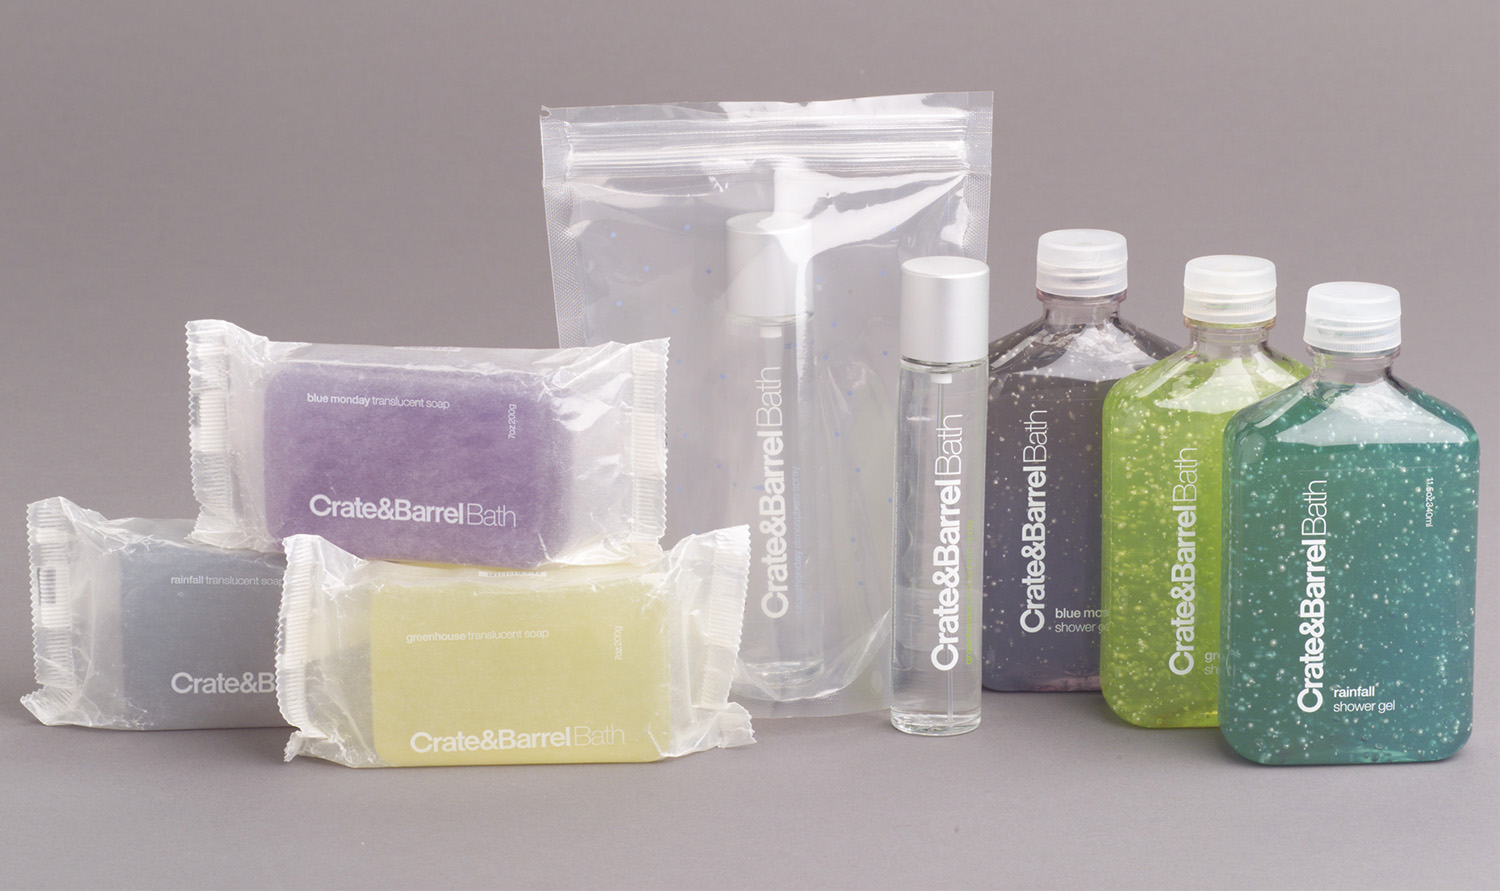 Crate&Barrel Bath Products Packaging